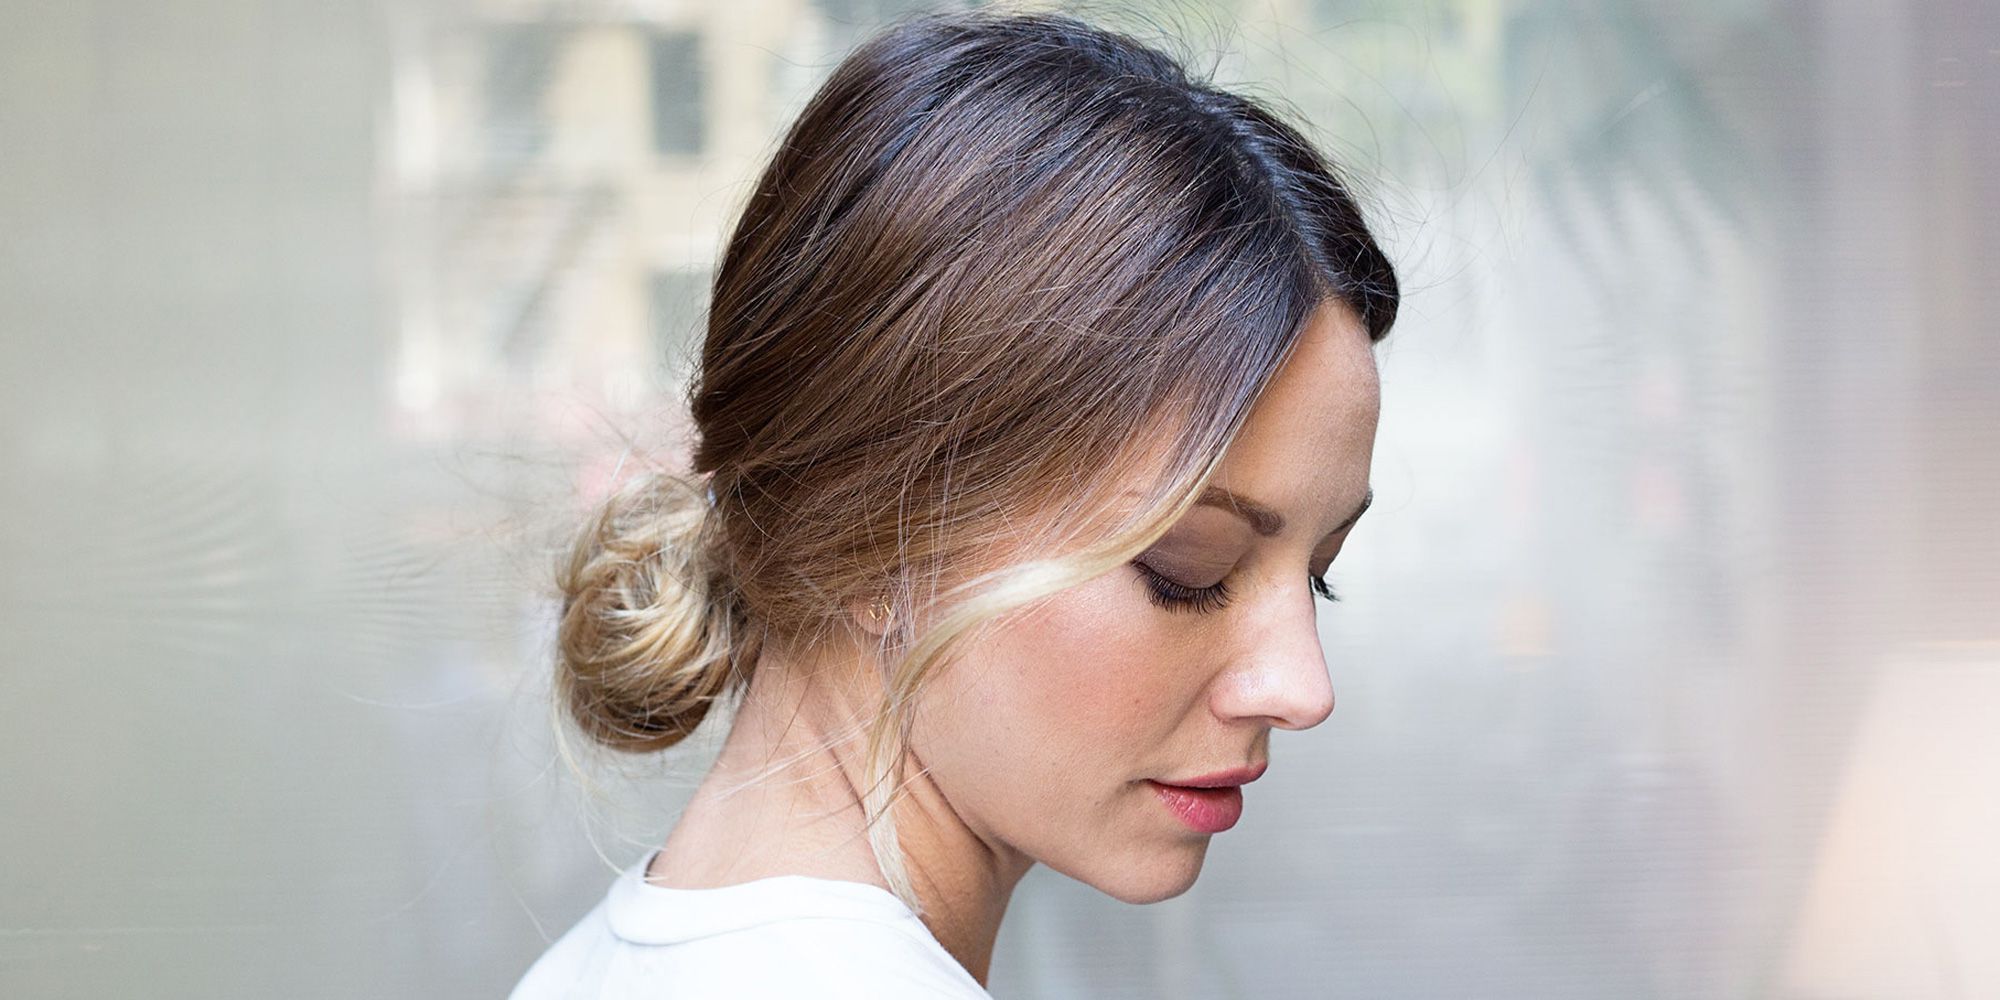 11 Ways To Make Your Bun Look Less Basic Regarding Most Popular Messy Bun Hairstyles With Double Headband (View 19 of 20)